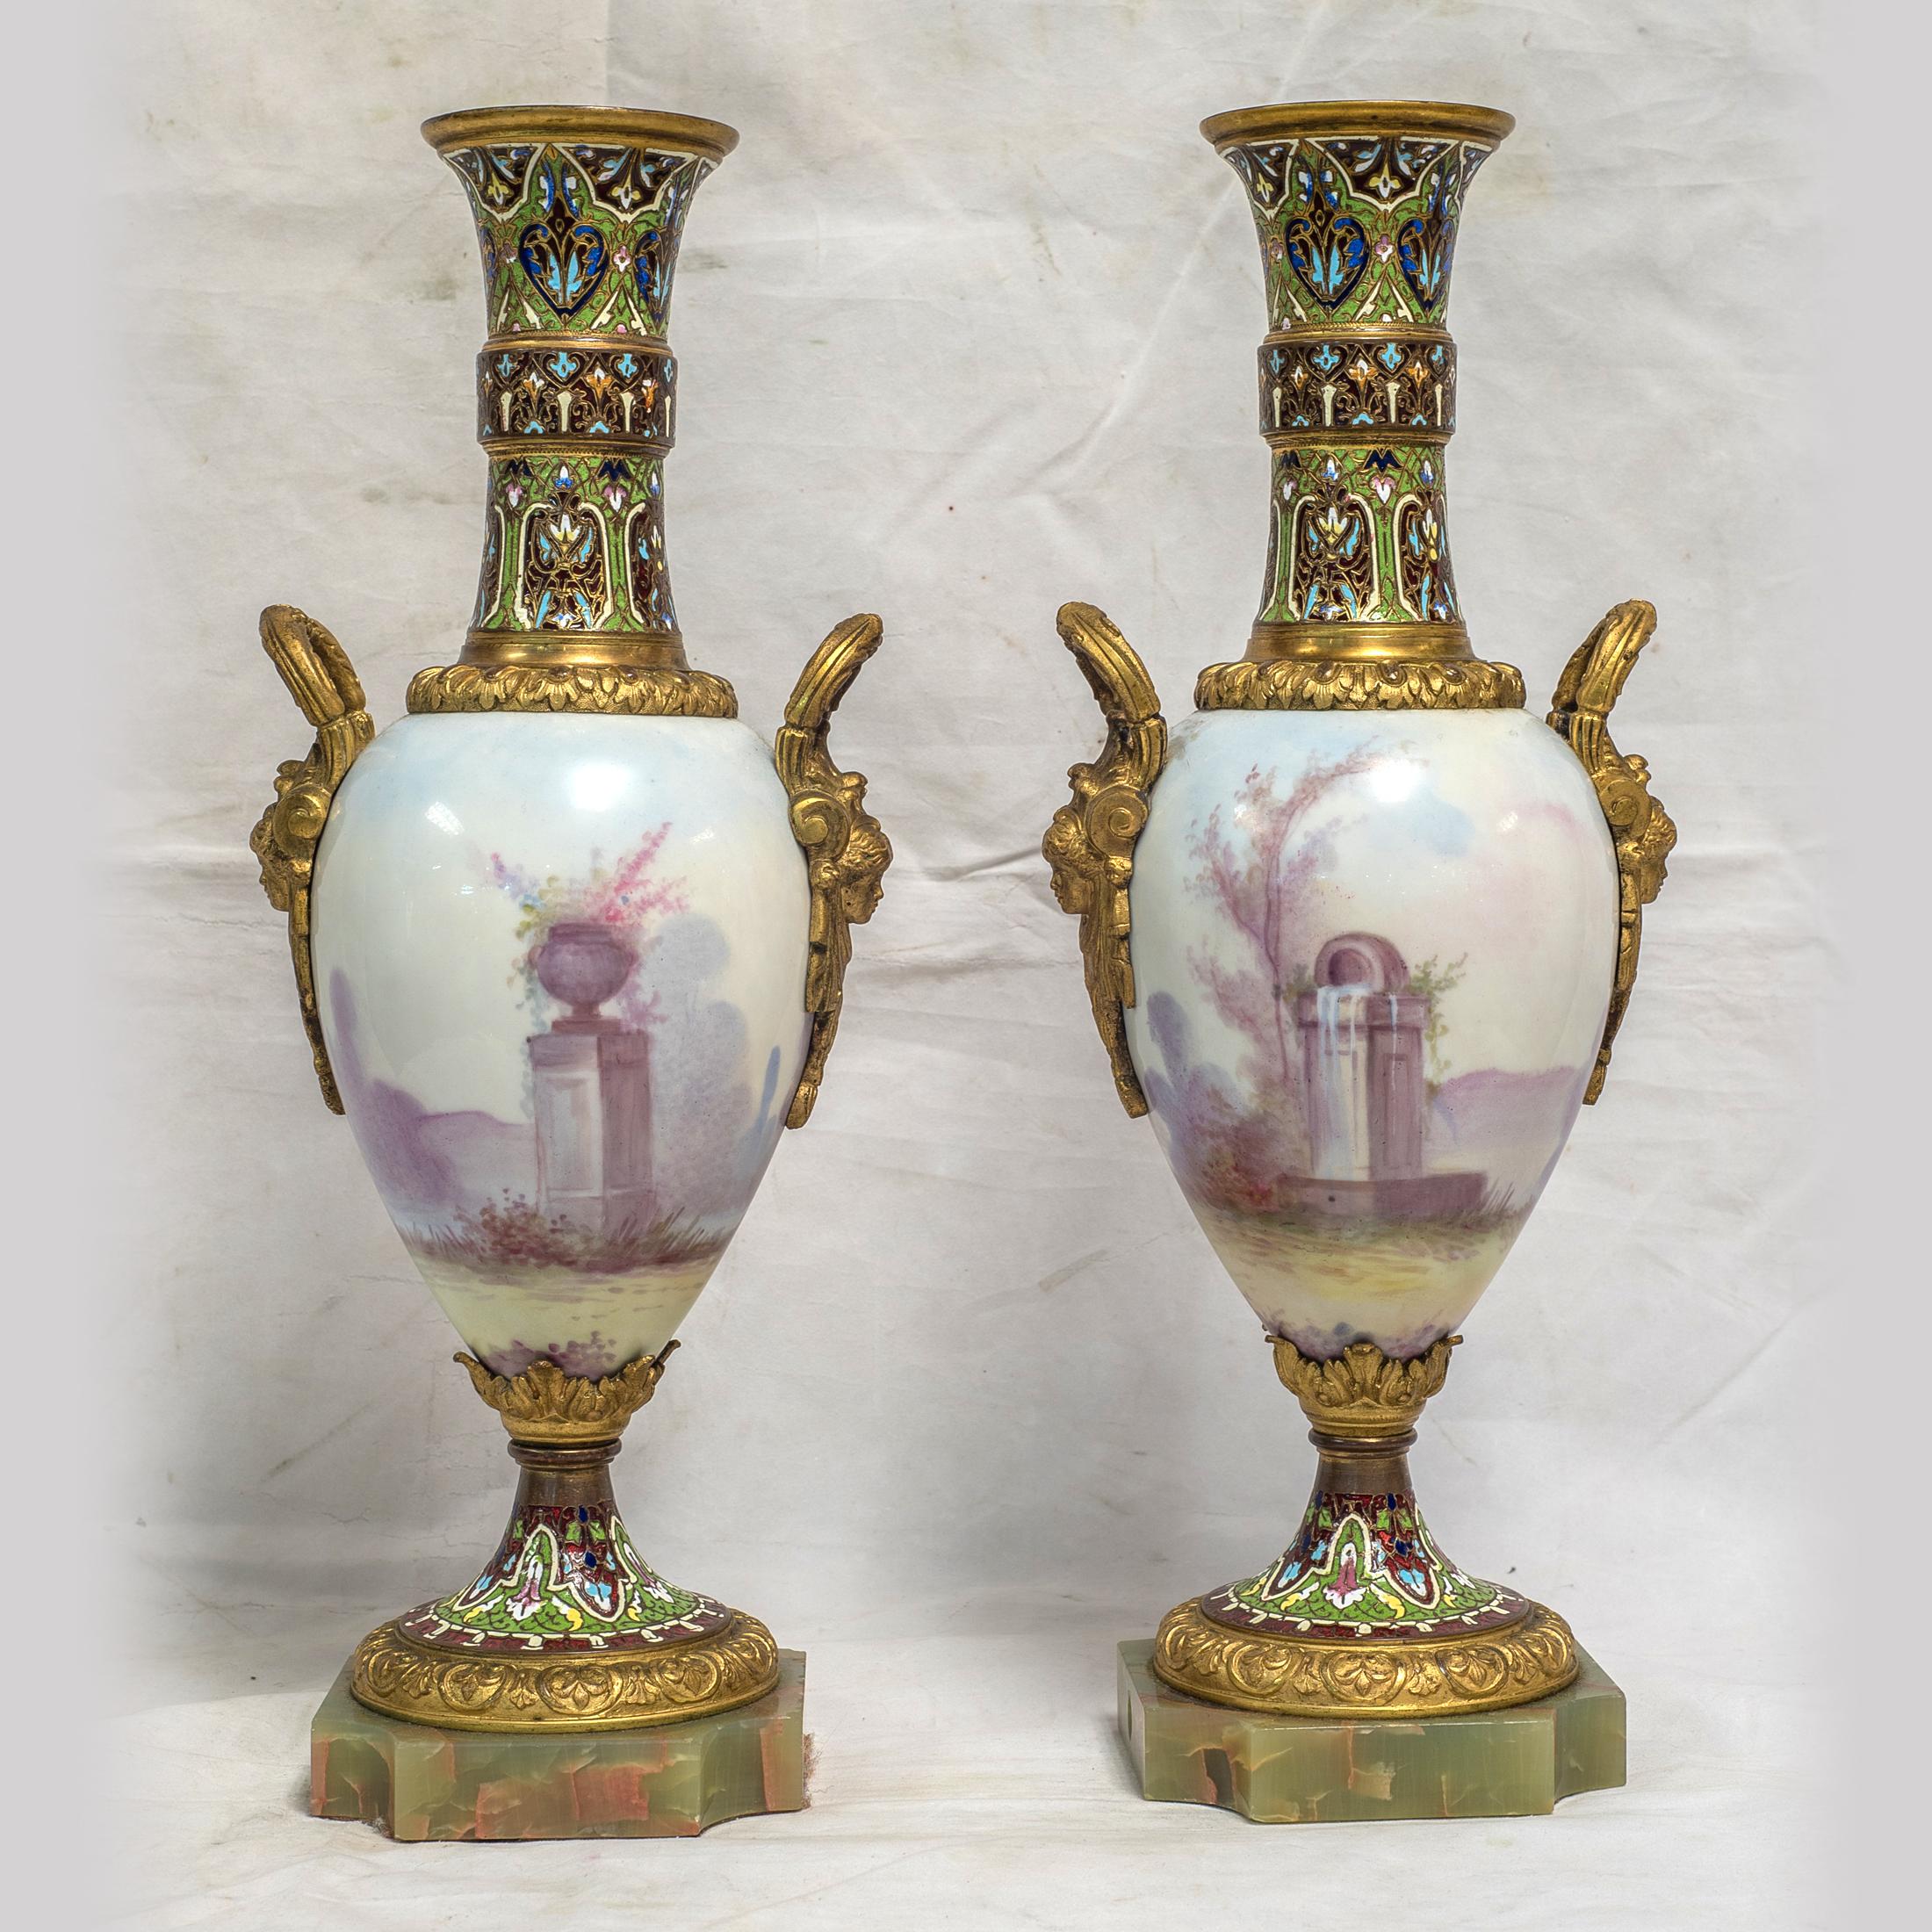 A stunning pair of Sevres-style porcelain vases with bronze and champlevé enamel mounts. Signed P. Raul

Date: 19th century
Origin: French
Dimension: 14 1/4 in x 5 3/4 in.
  